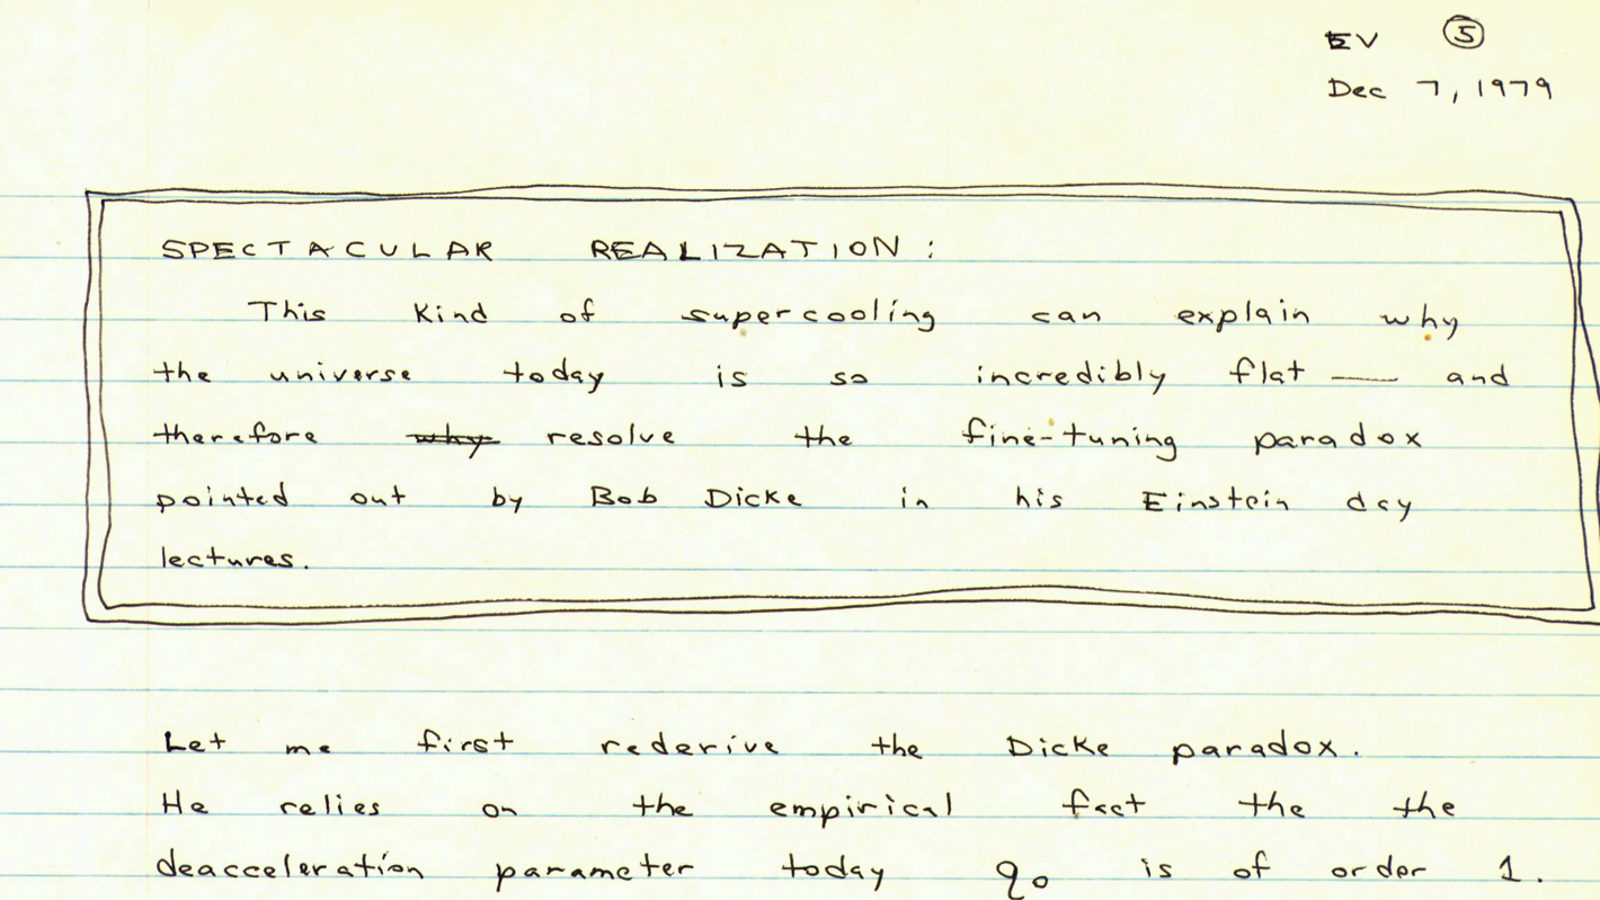 Handwritten notes on scientific observations regarding the universe and incompleteness in physics, dated December 7, 1979.